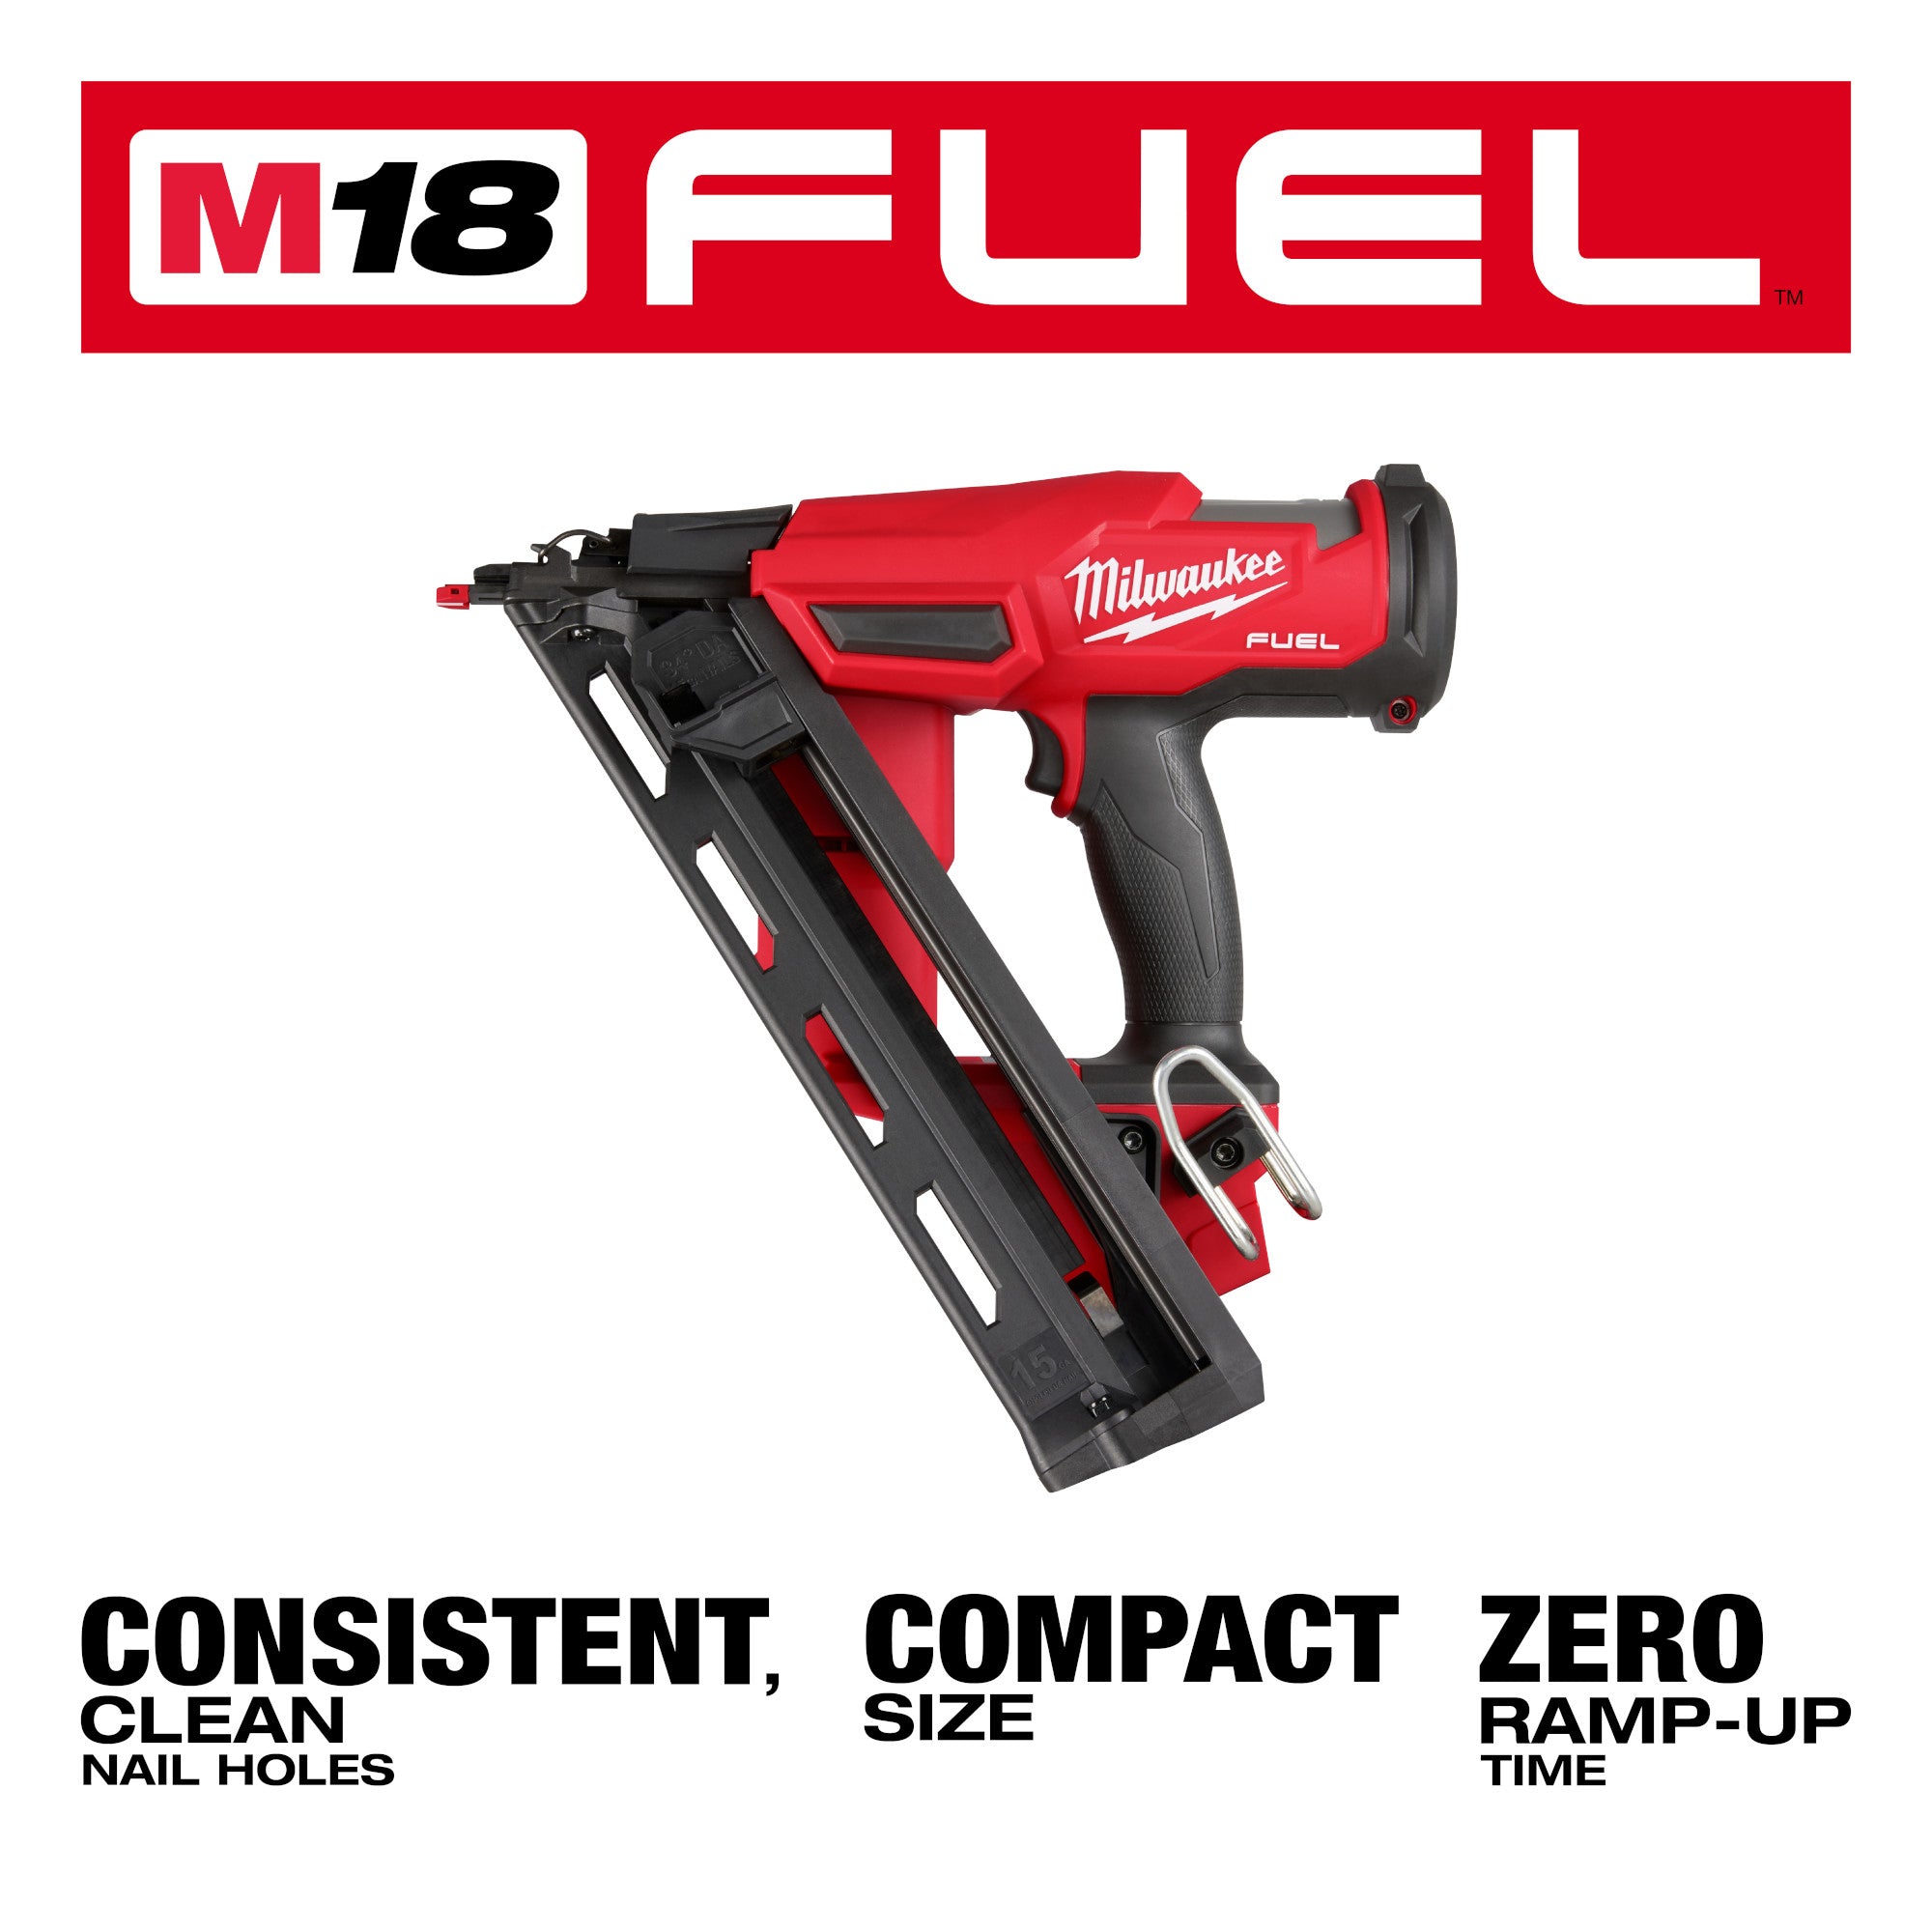 15-Gauge 2-1/2" Cordless M18 FUEL Angled Finish Nailer (Tool Only)